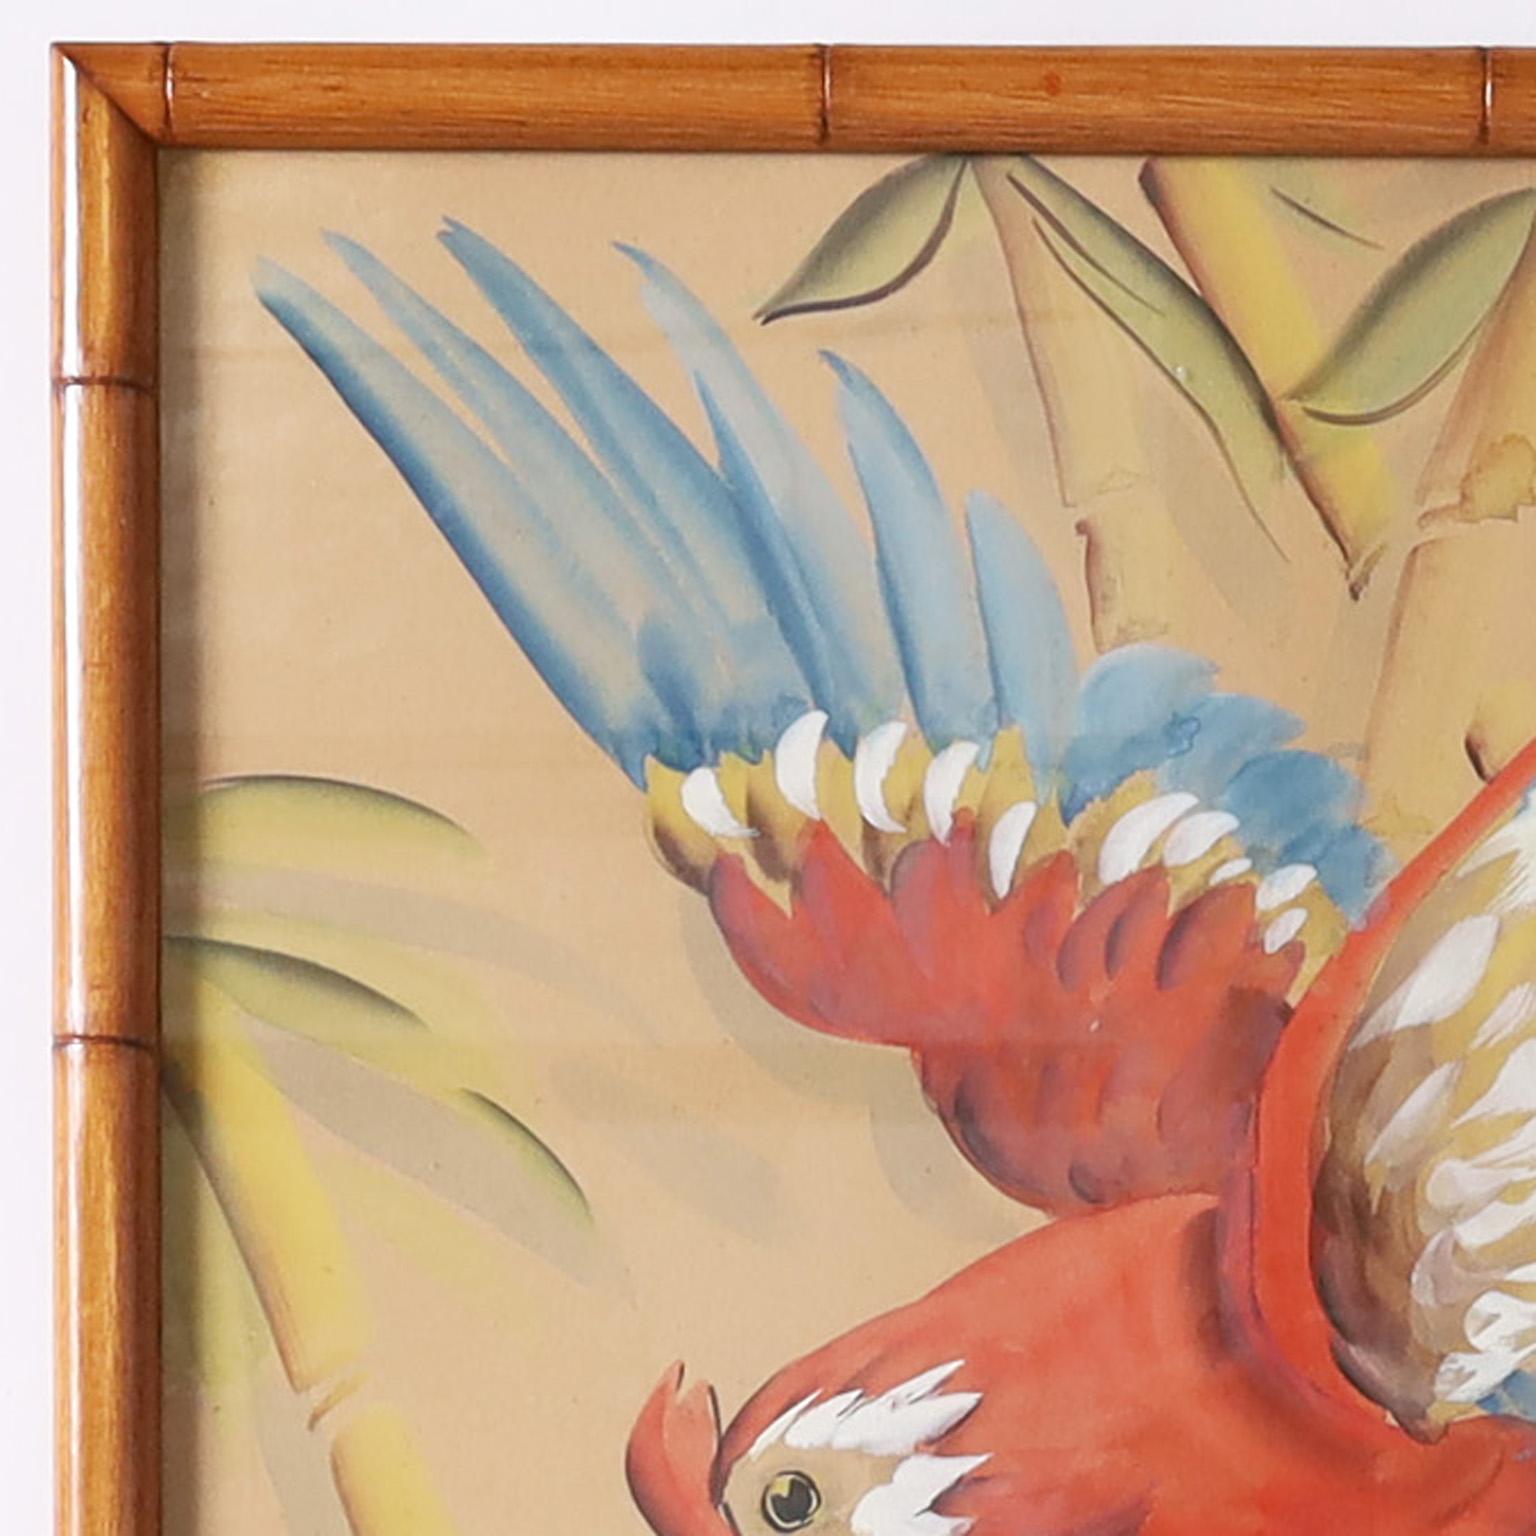 Mixed Media Painting of a Parrot in a Faux Bamboo Frame - Art Deco Art by Unknown